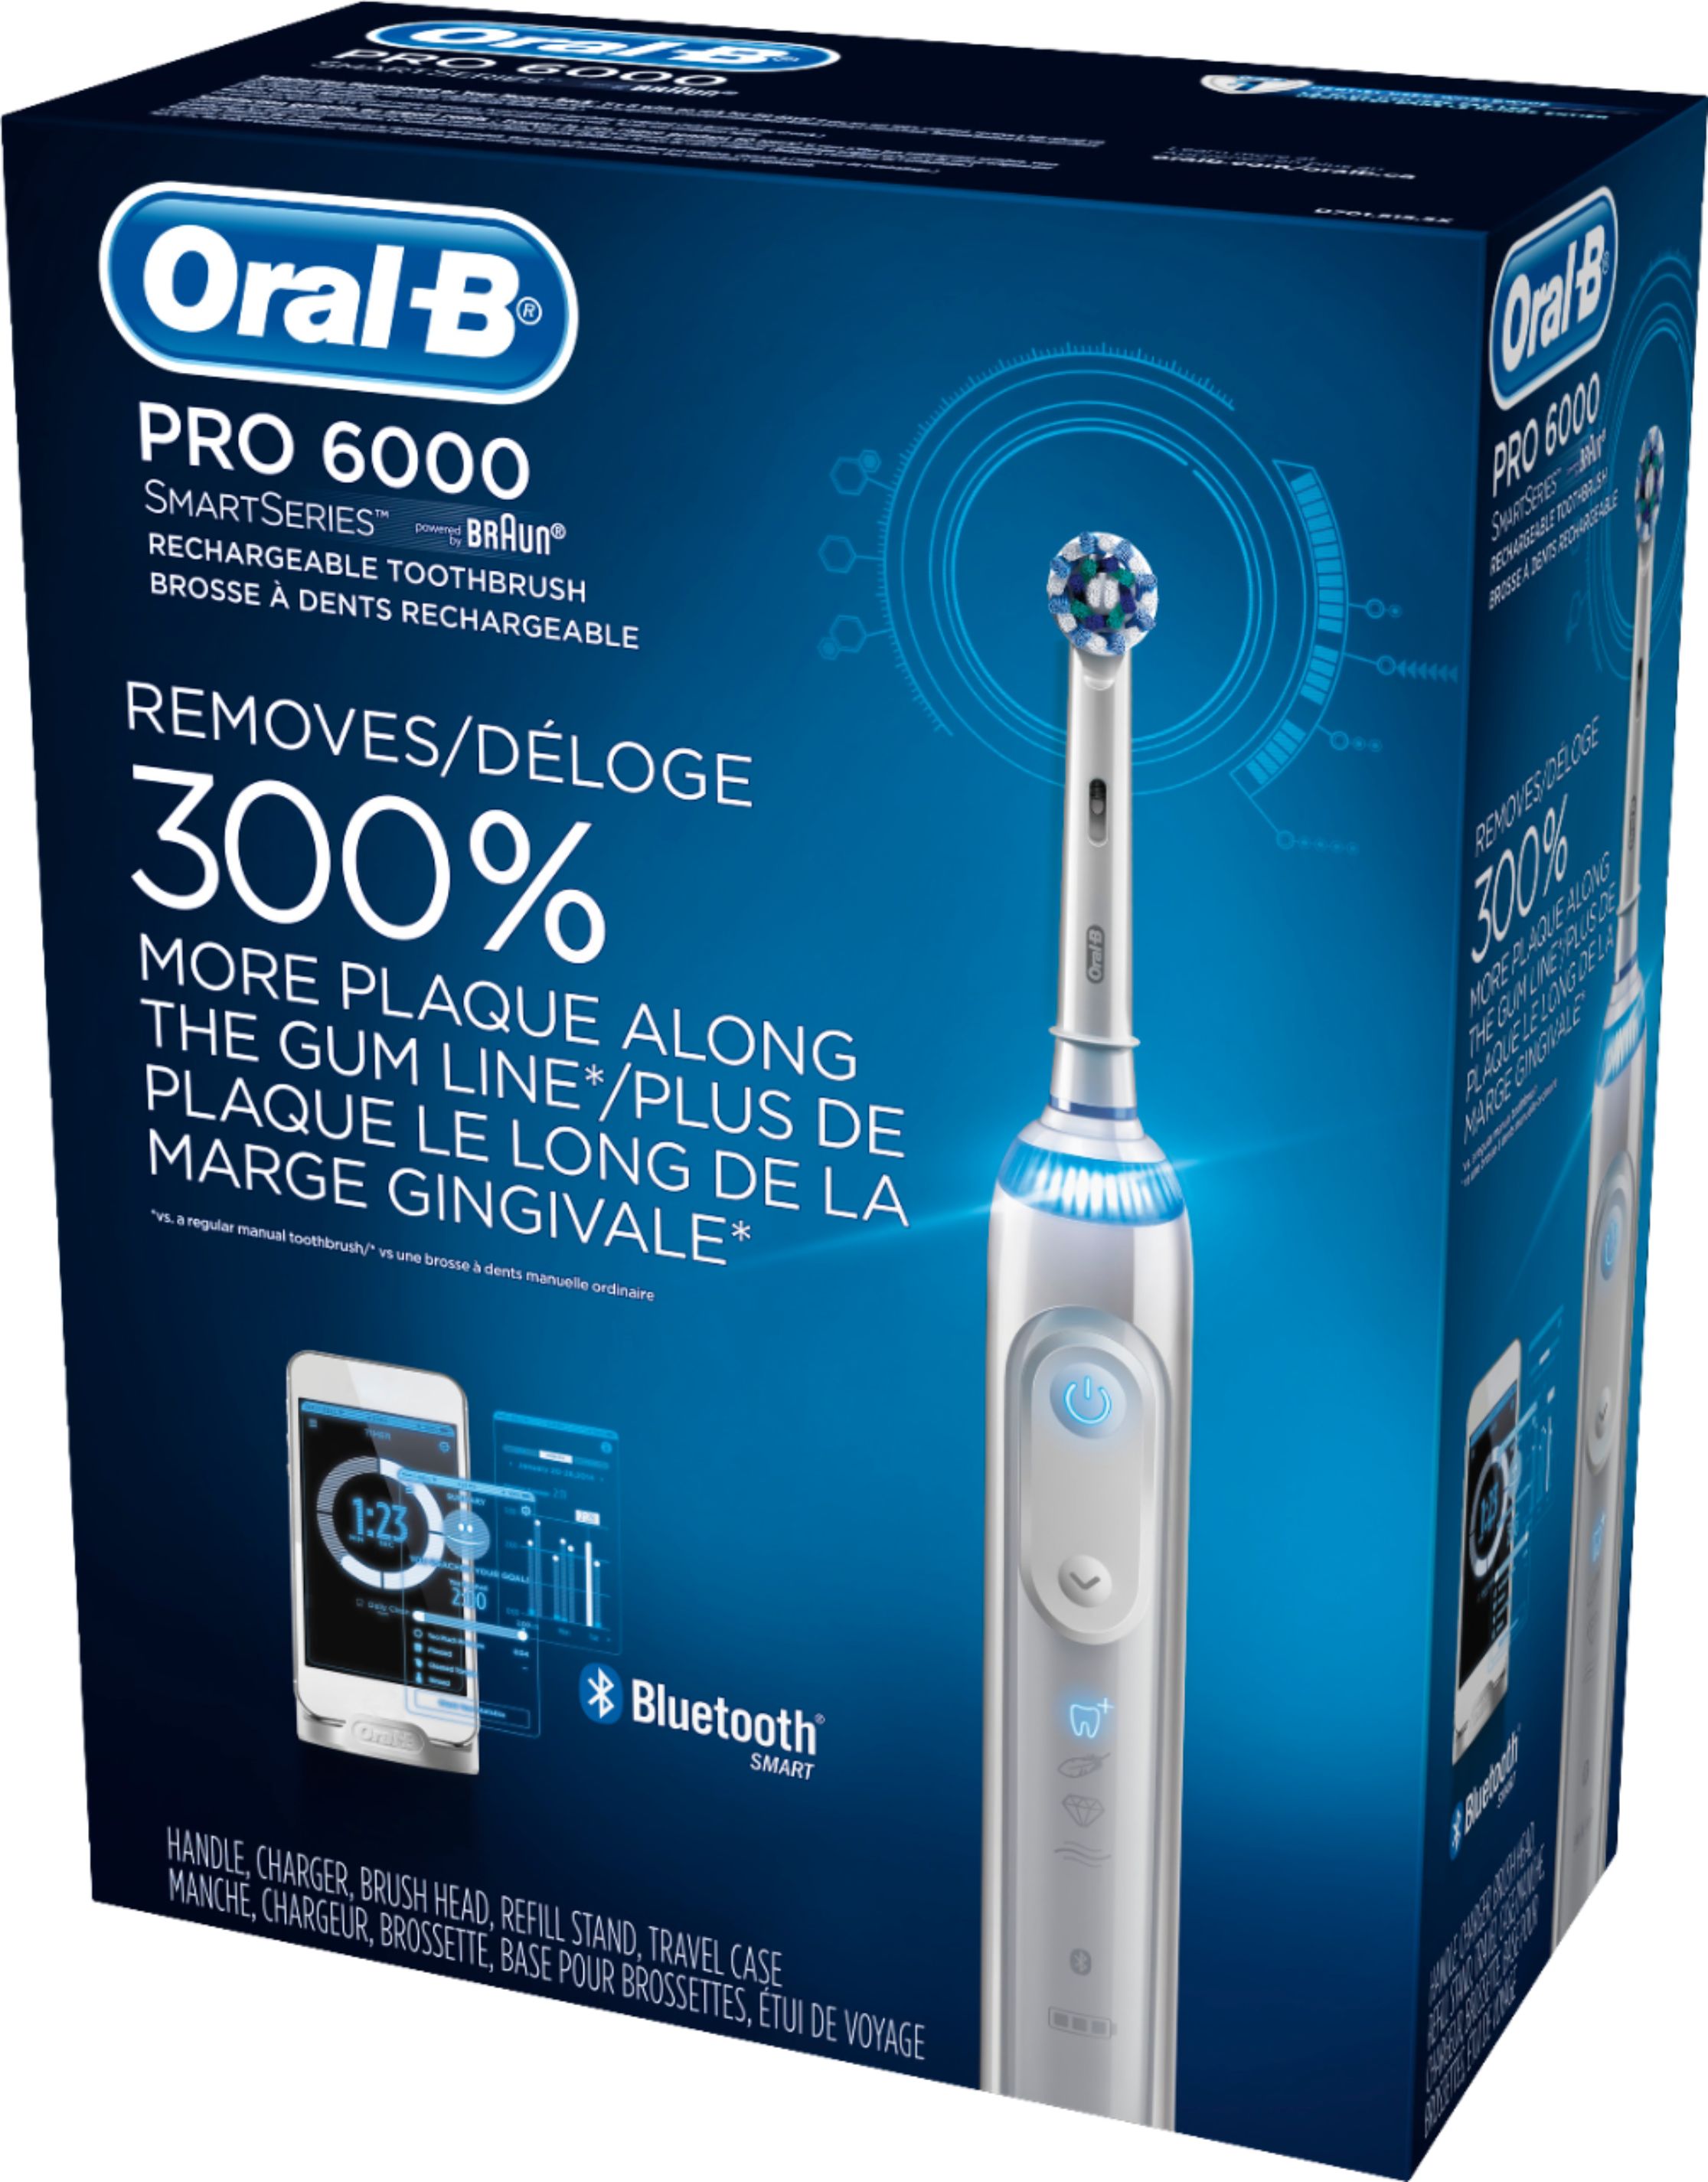 customer-reviews-oral-b-genius-6000-electric-toothbrush-powered-by